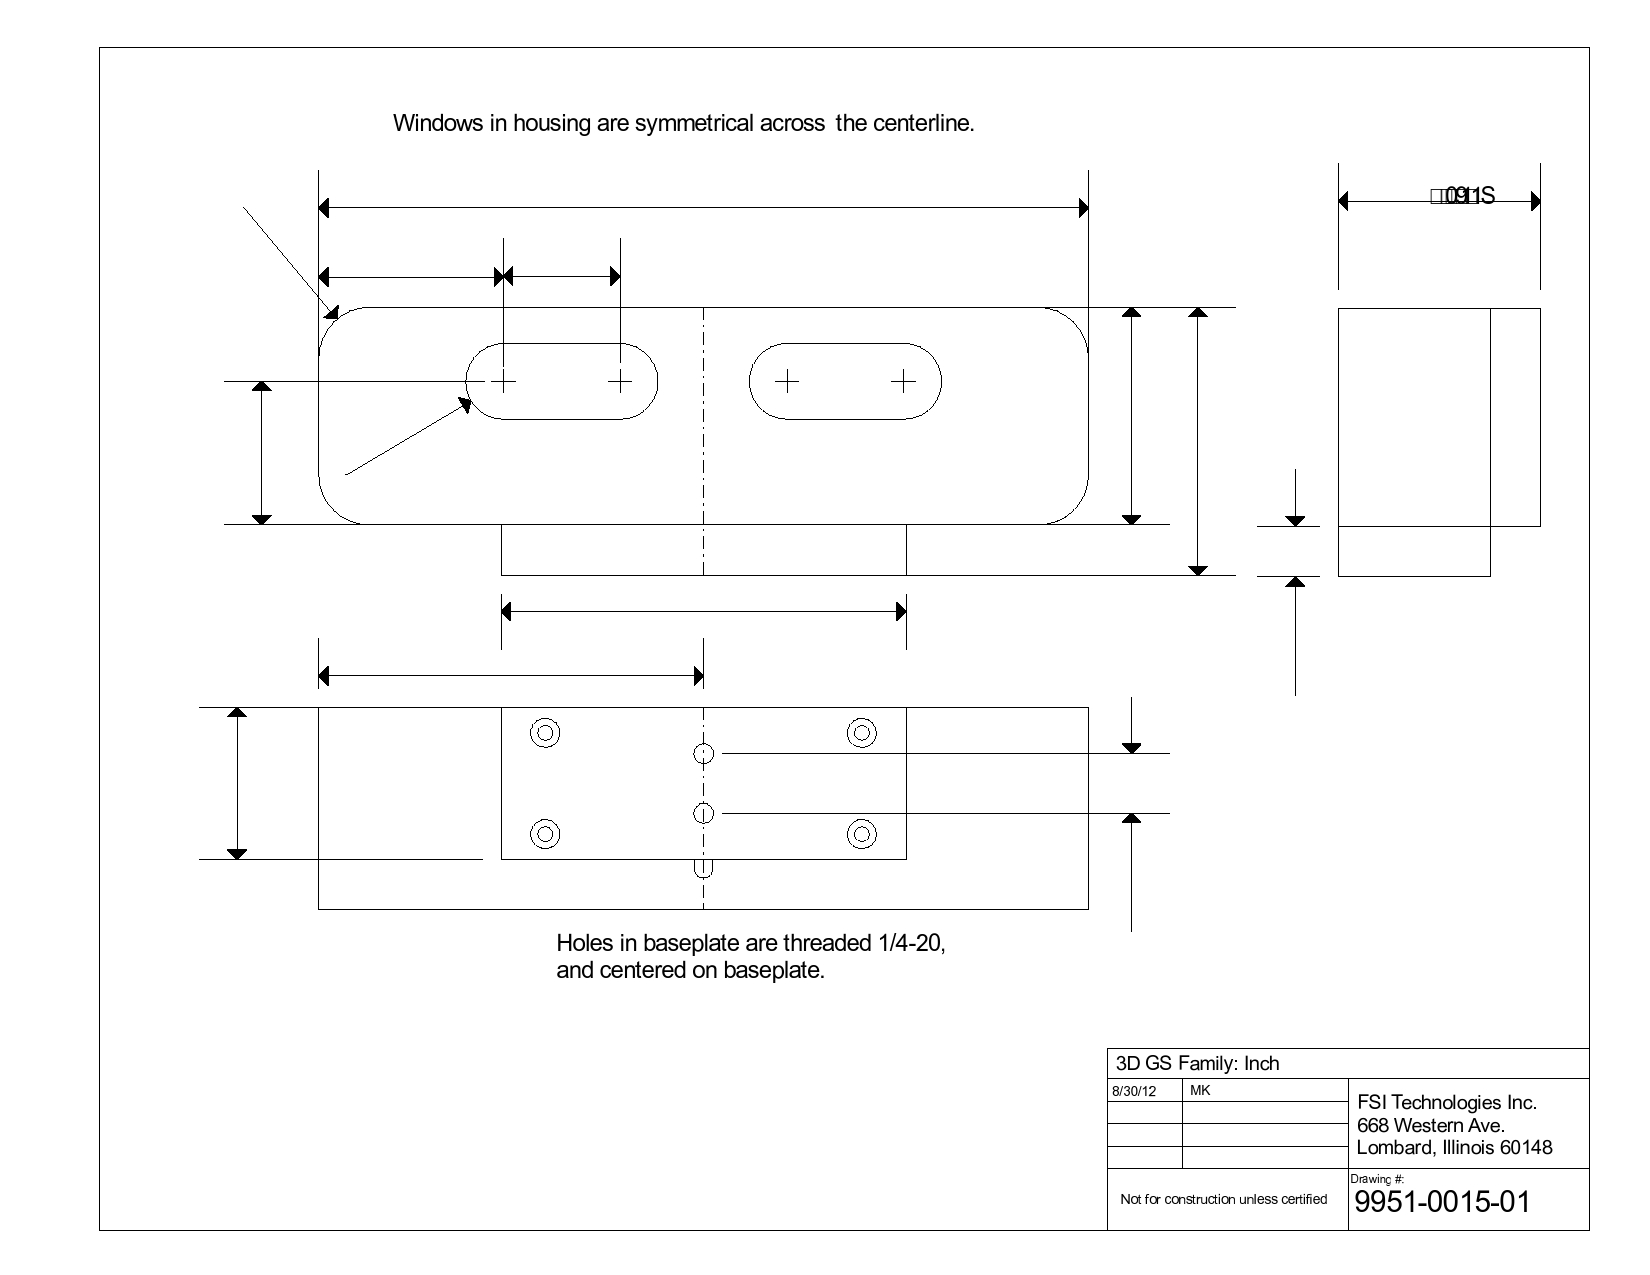 3D Vision System drawing